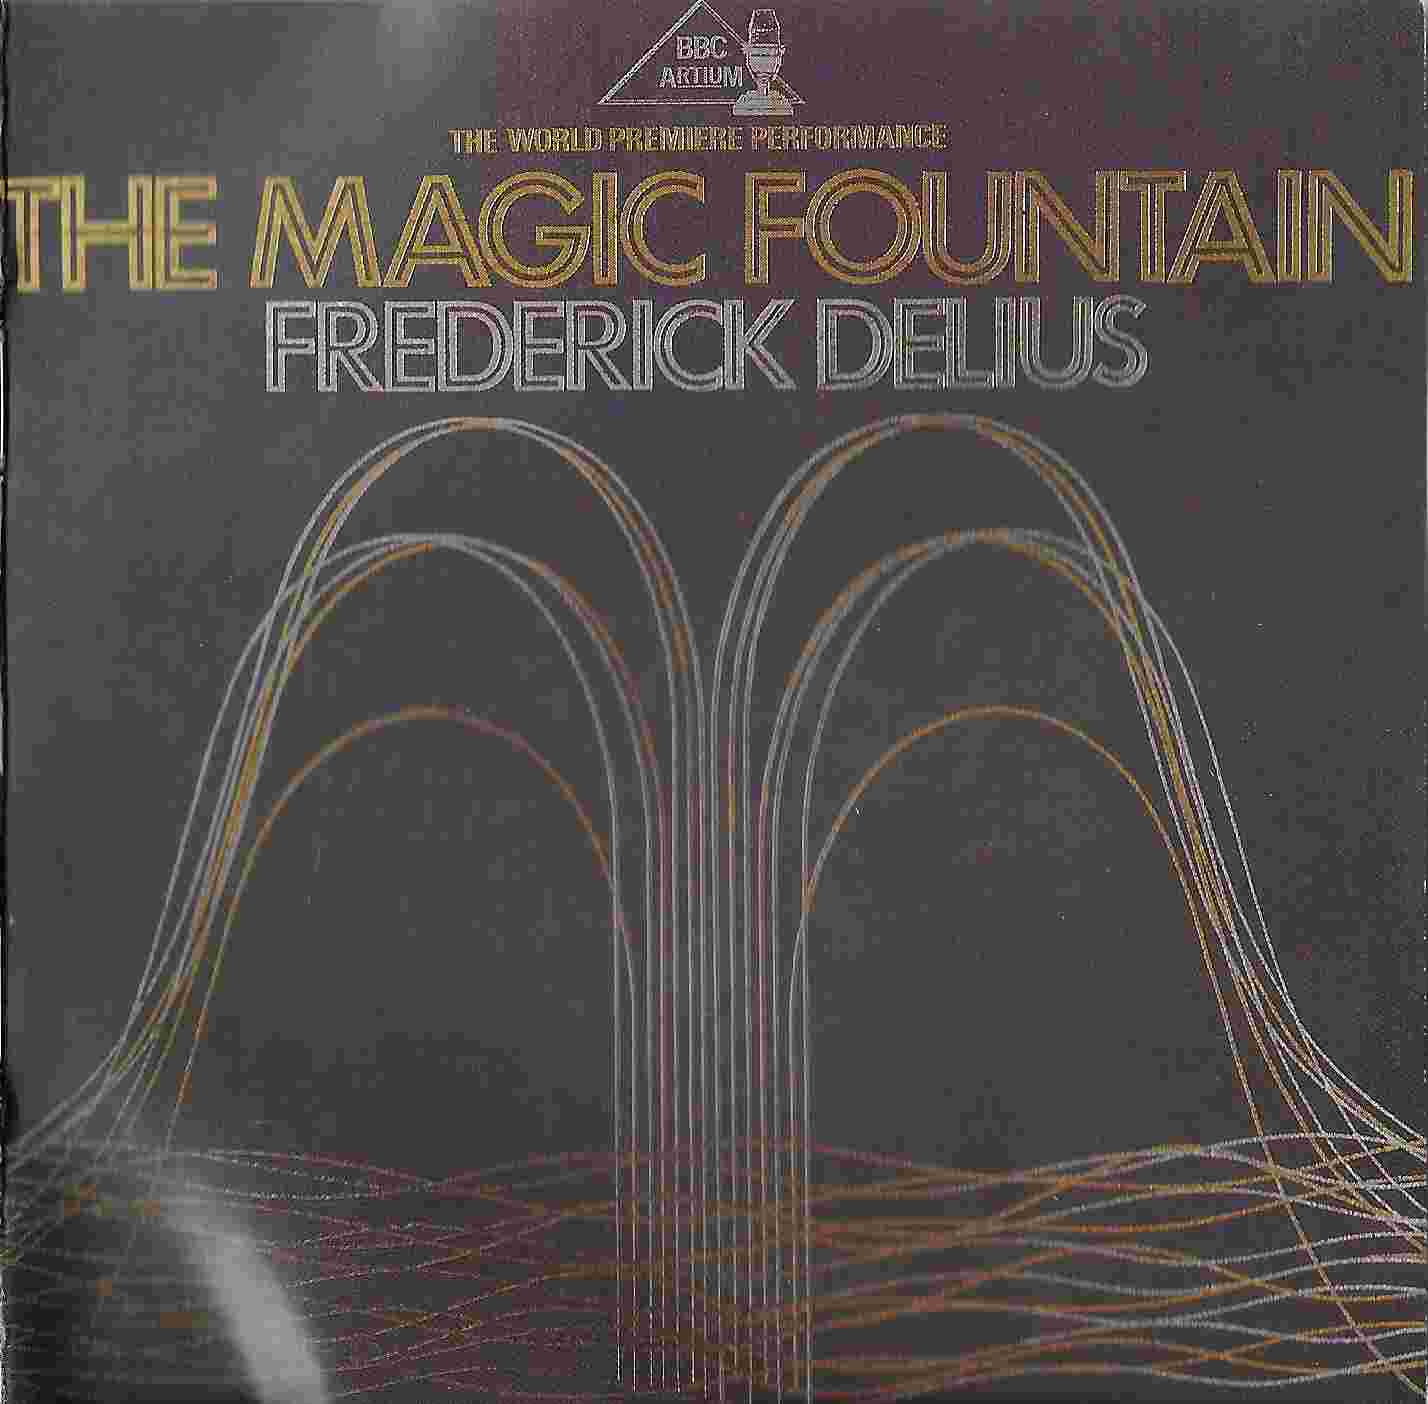 Picture of BBCCD3004X The magic fountain / Margot La Rouge by artist Frederic Delius from the BBC cds - Records and Tapes library